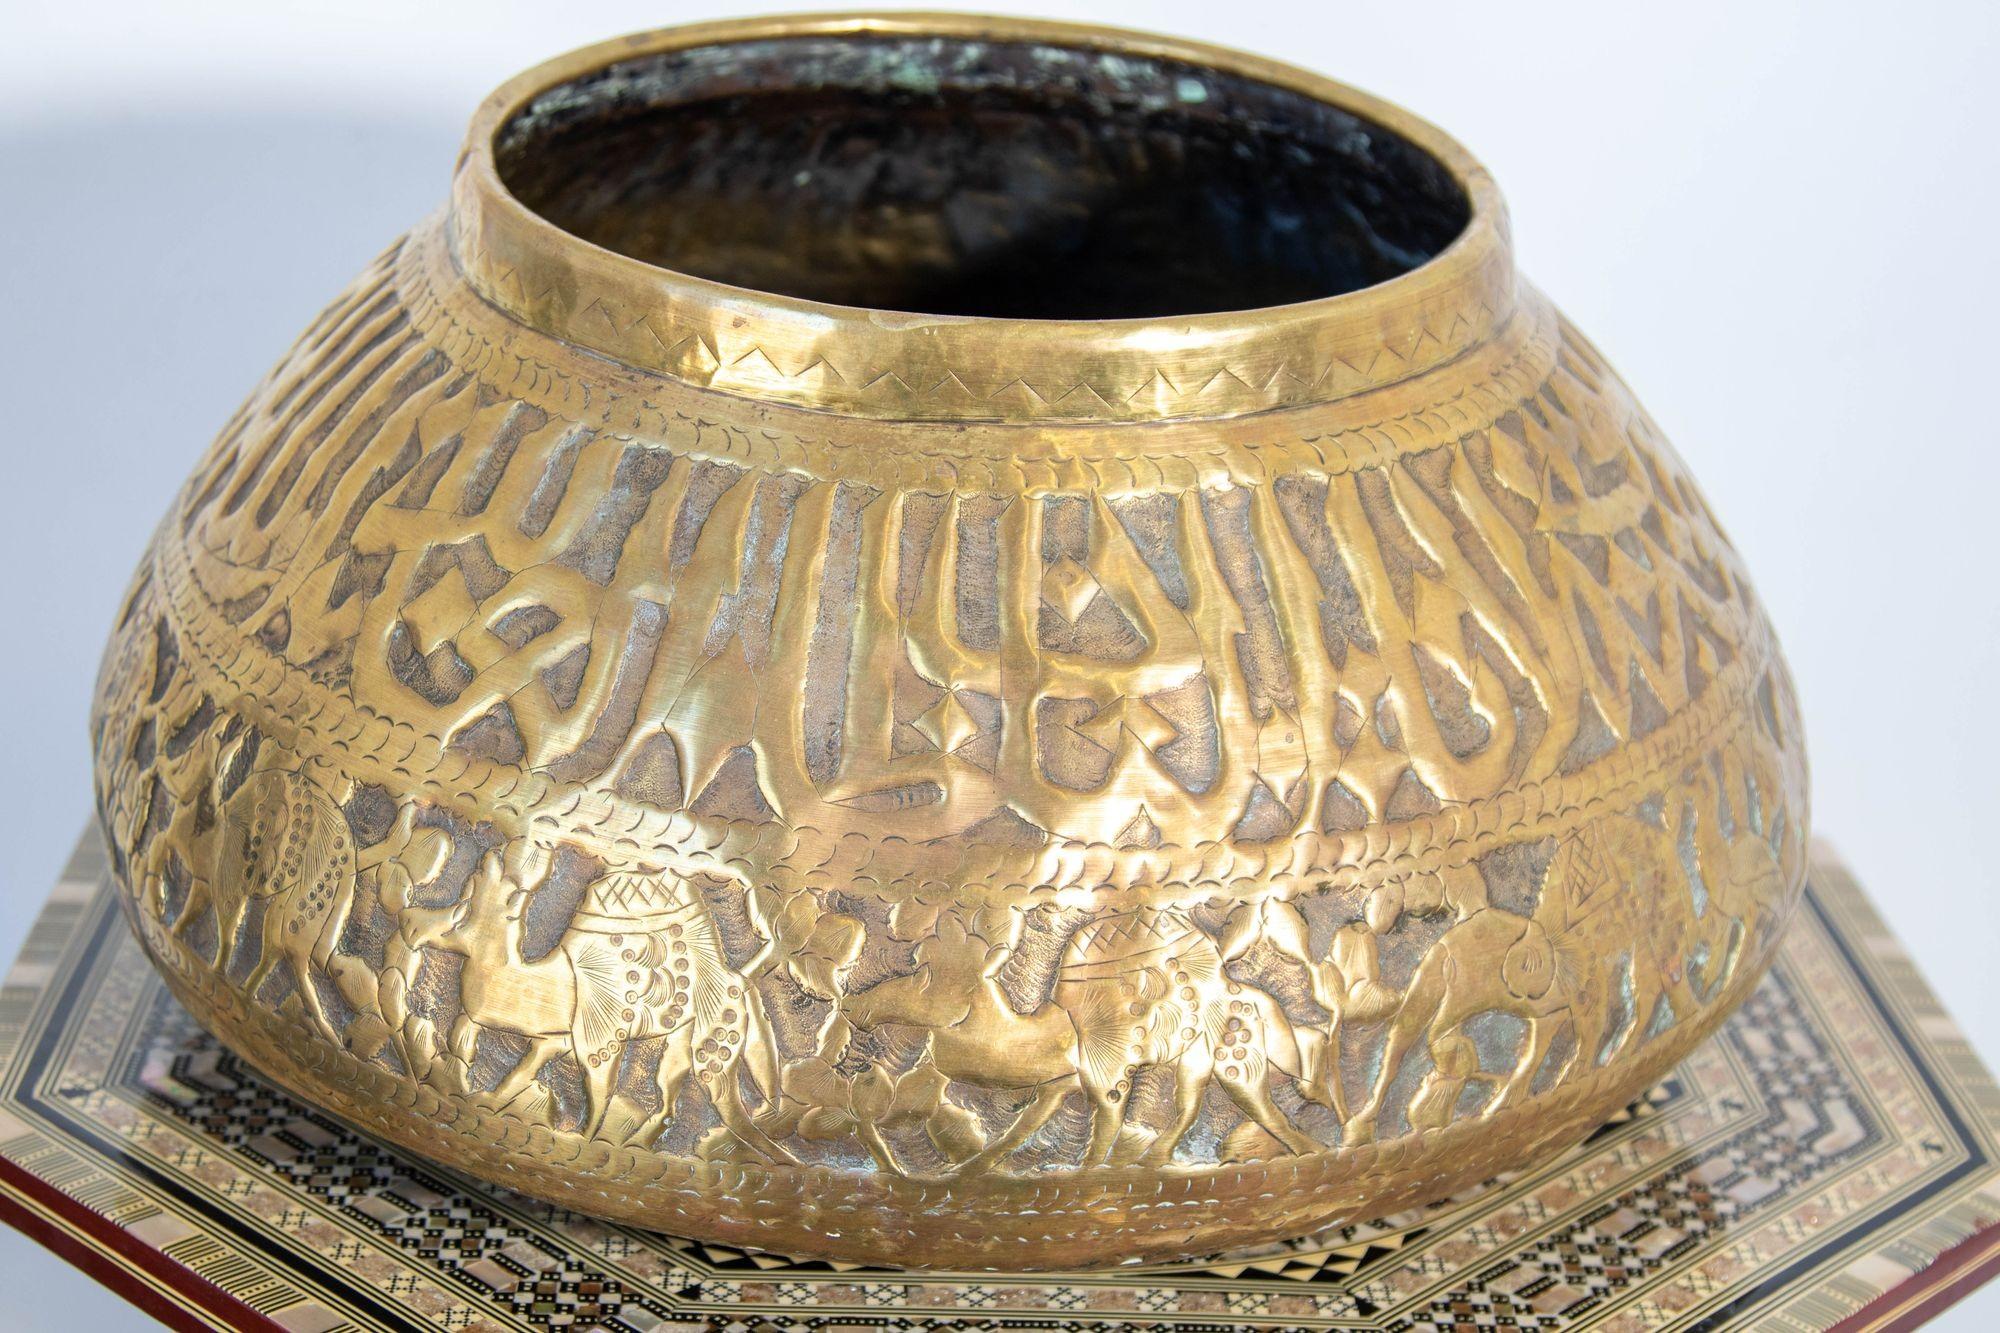 Antique large Middle Eastern Egyptian hand-etched and repousse Mameluke style brass bowl.
Could be used as a jardinière, cache pot for a large orchids composition.
Engraved and hand-embossed with Arabic Islamic Tuluth writing calligraphy and